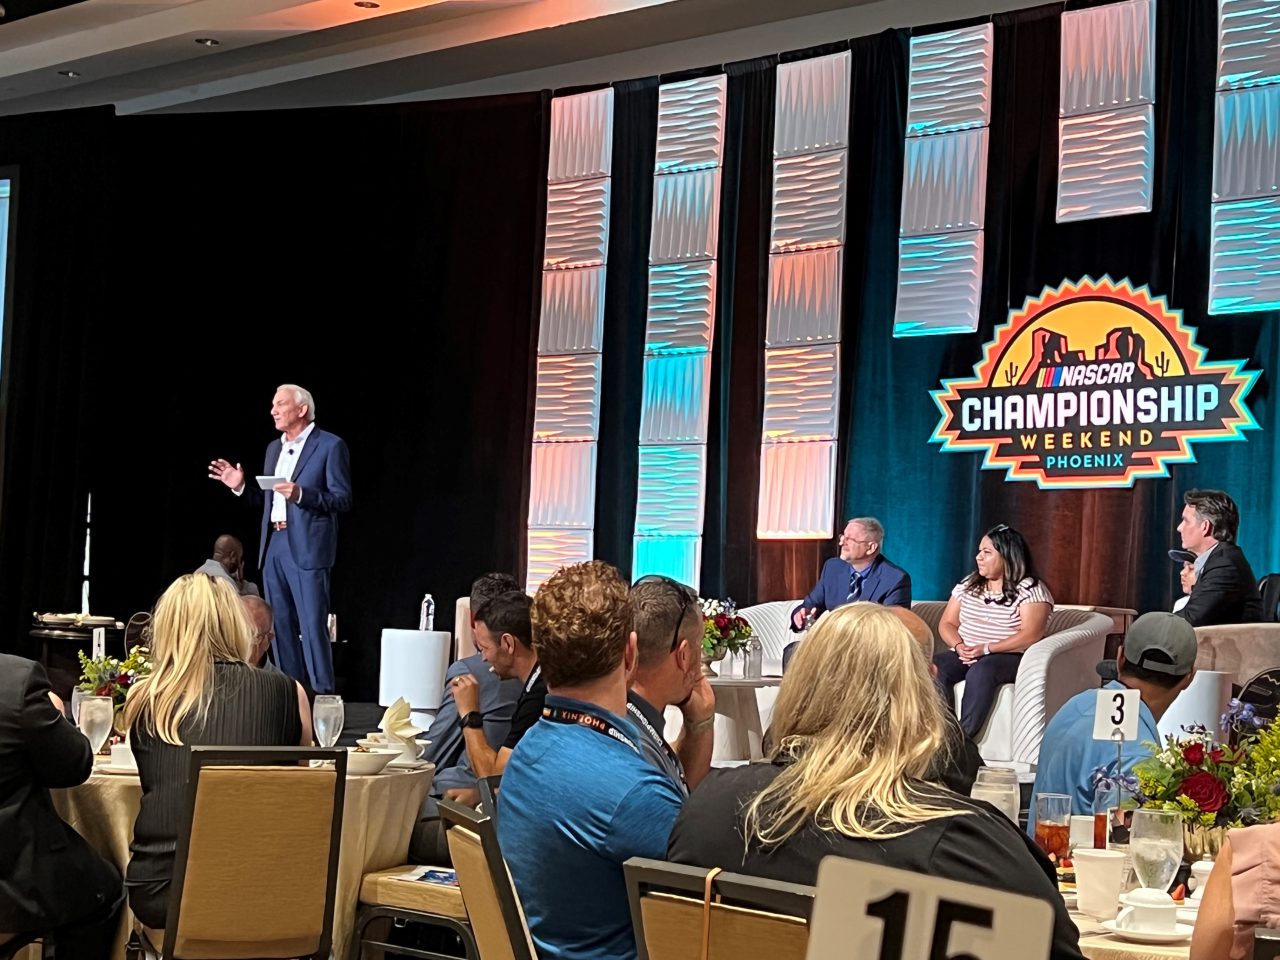 The NASCAR Championship Ignition Luncheon